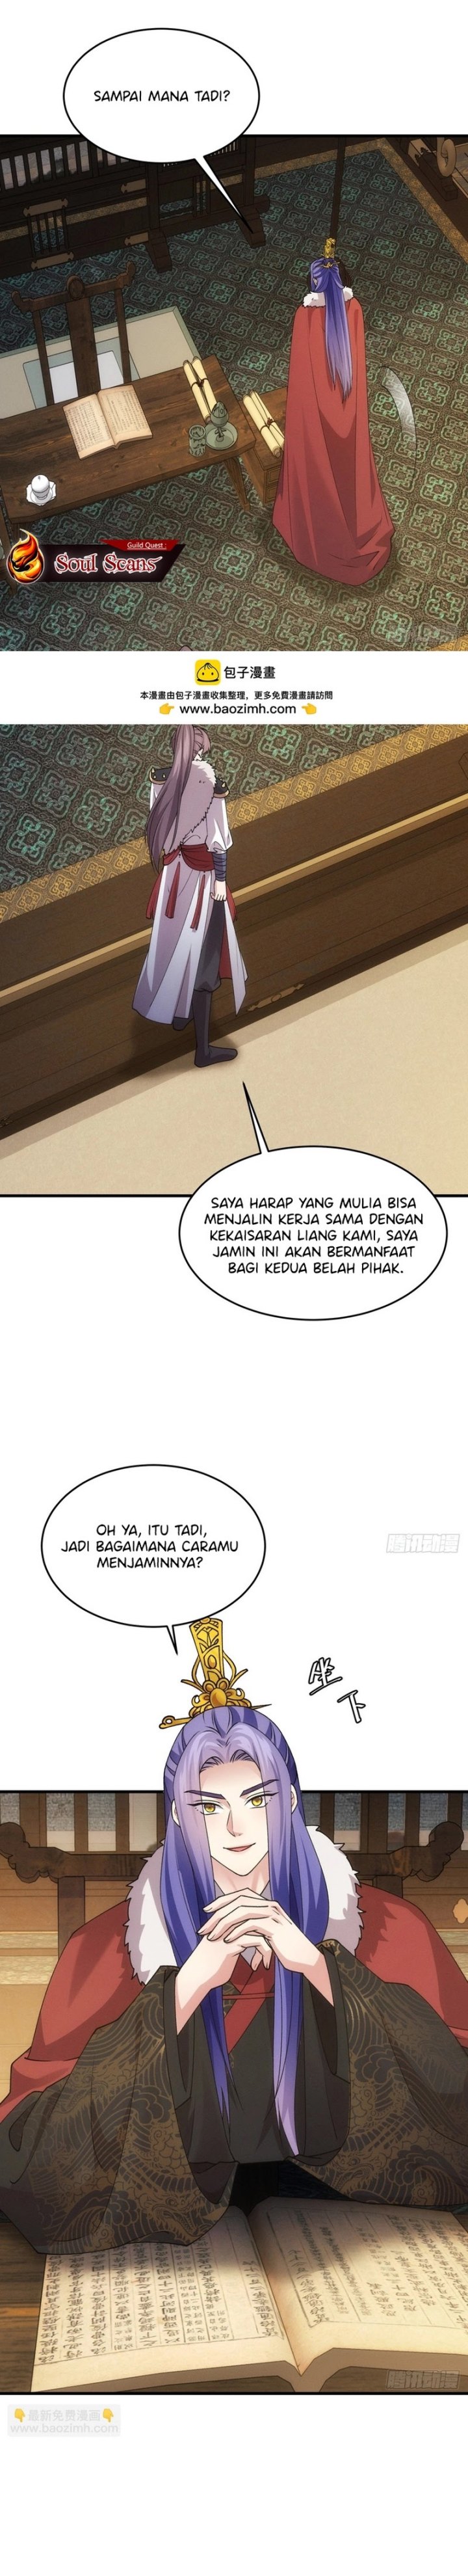 Dilarang COPAS - situs resmi www.mangacanblog.com - Komik i just dont play the card according to the routine 193 - chapter 193 194 Indonesia i just dont play the card according to the routine 193 - chapter 193 Terbaru 8|Baca Manga Komik Indonesia|Mangacan